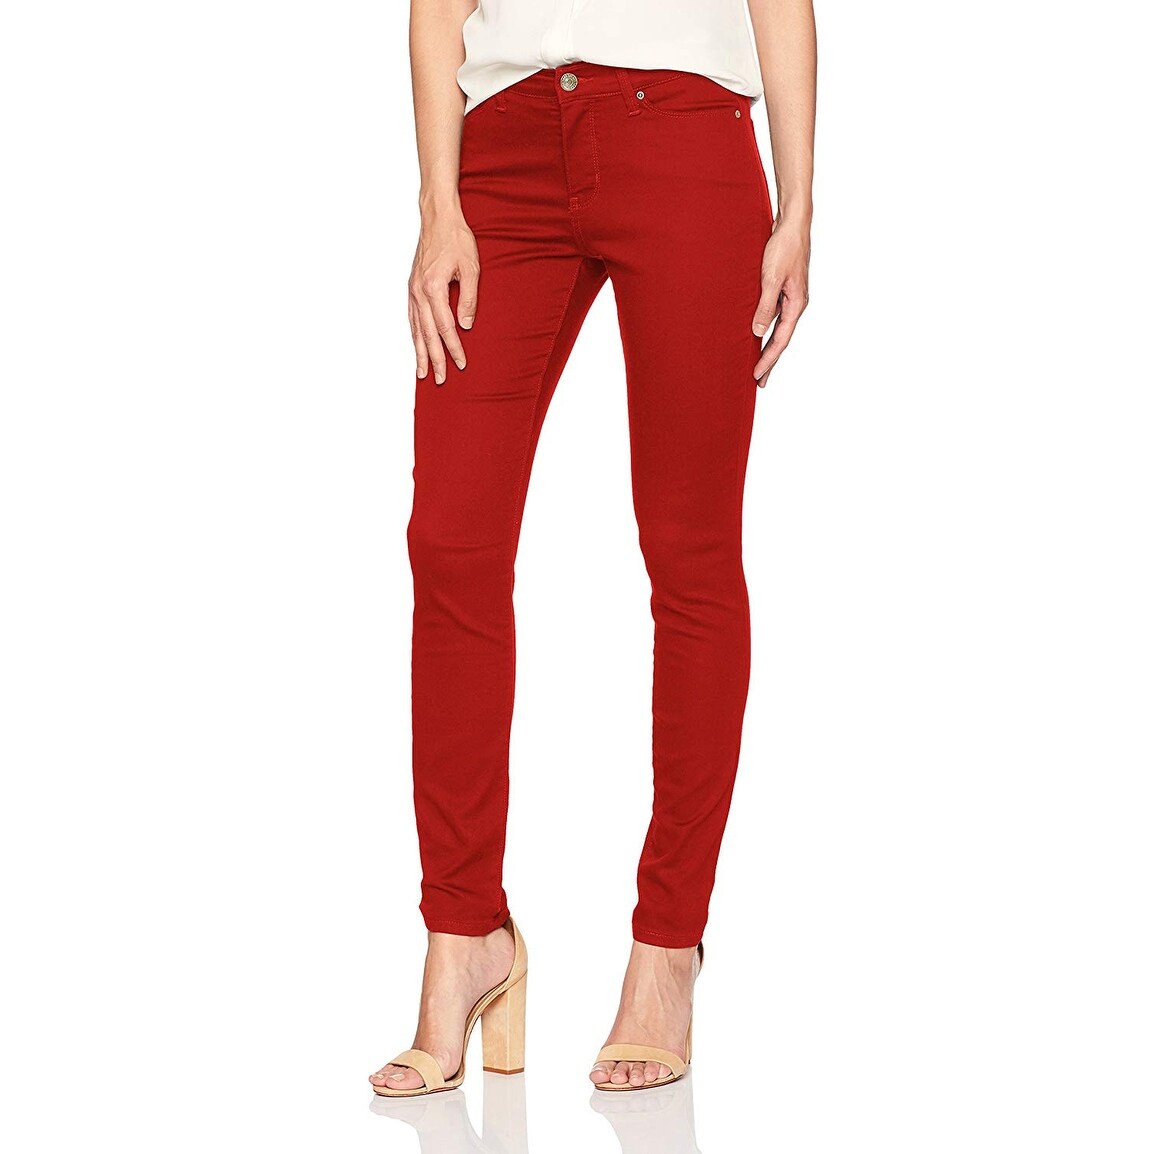 lee red jeans